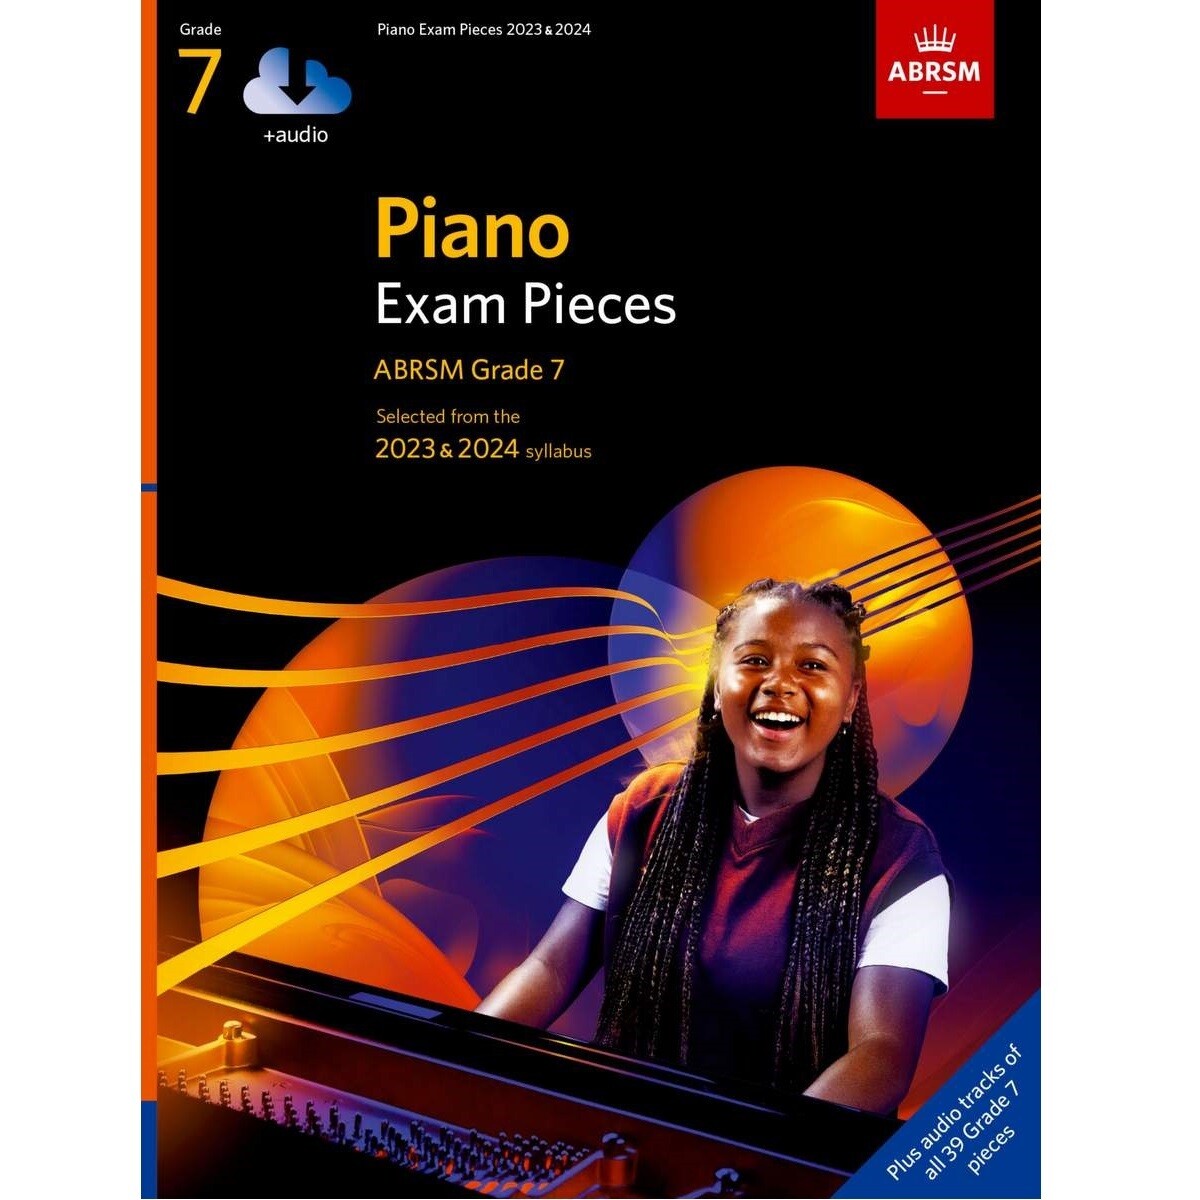 ABRSM Piano Exam Pieces 2023 and 2024 - Grade 7 (Book with Online Audio)